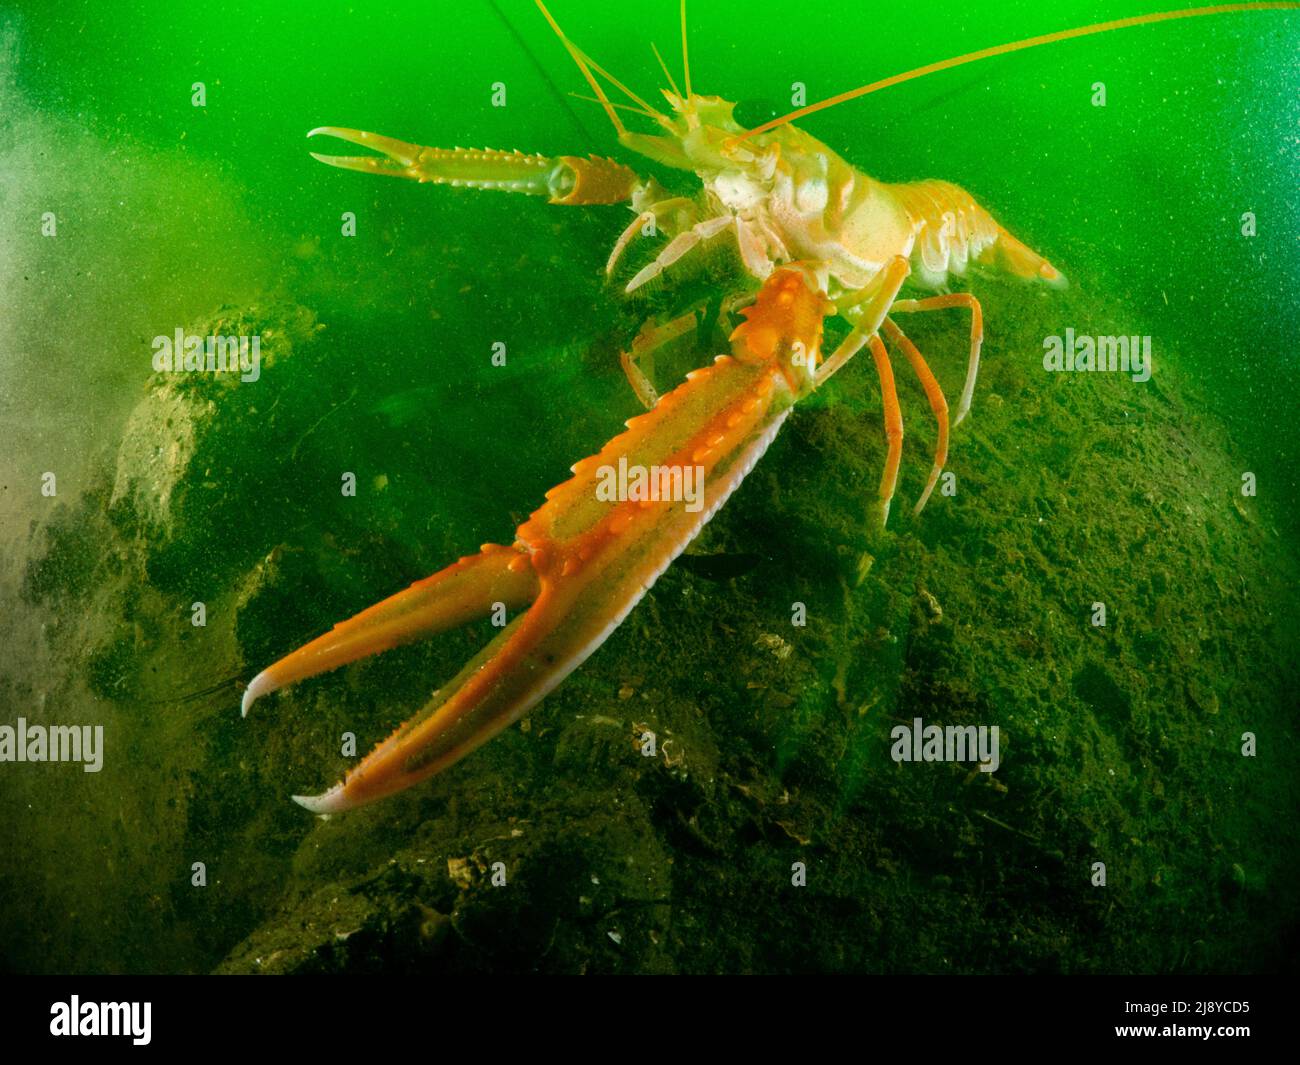 A large langoustine - Nephrops norvegicus -  also known as dublin prawn, norwegian lobster or scampi, on the silty sea bed of Loch Leven in Scotland. Stock Photo